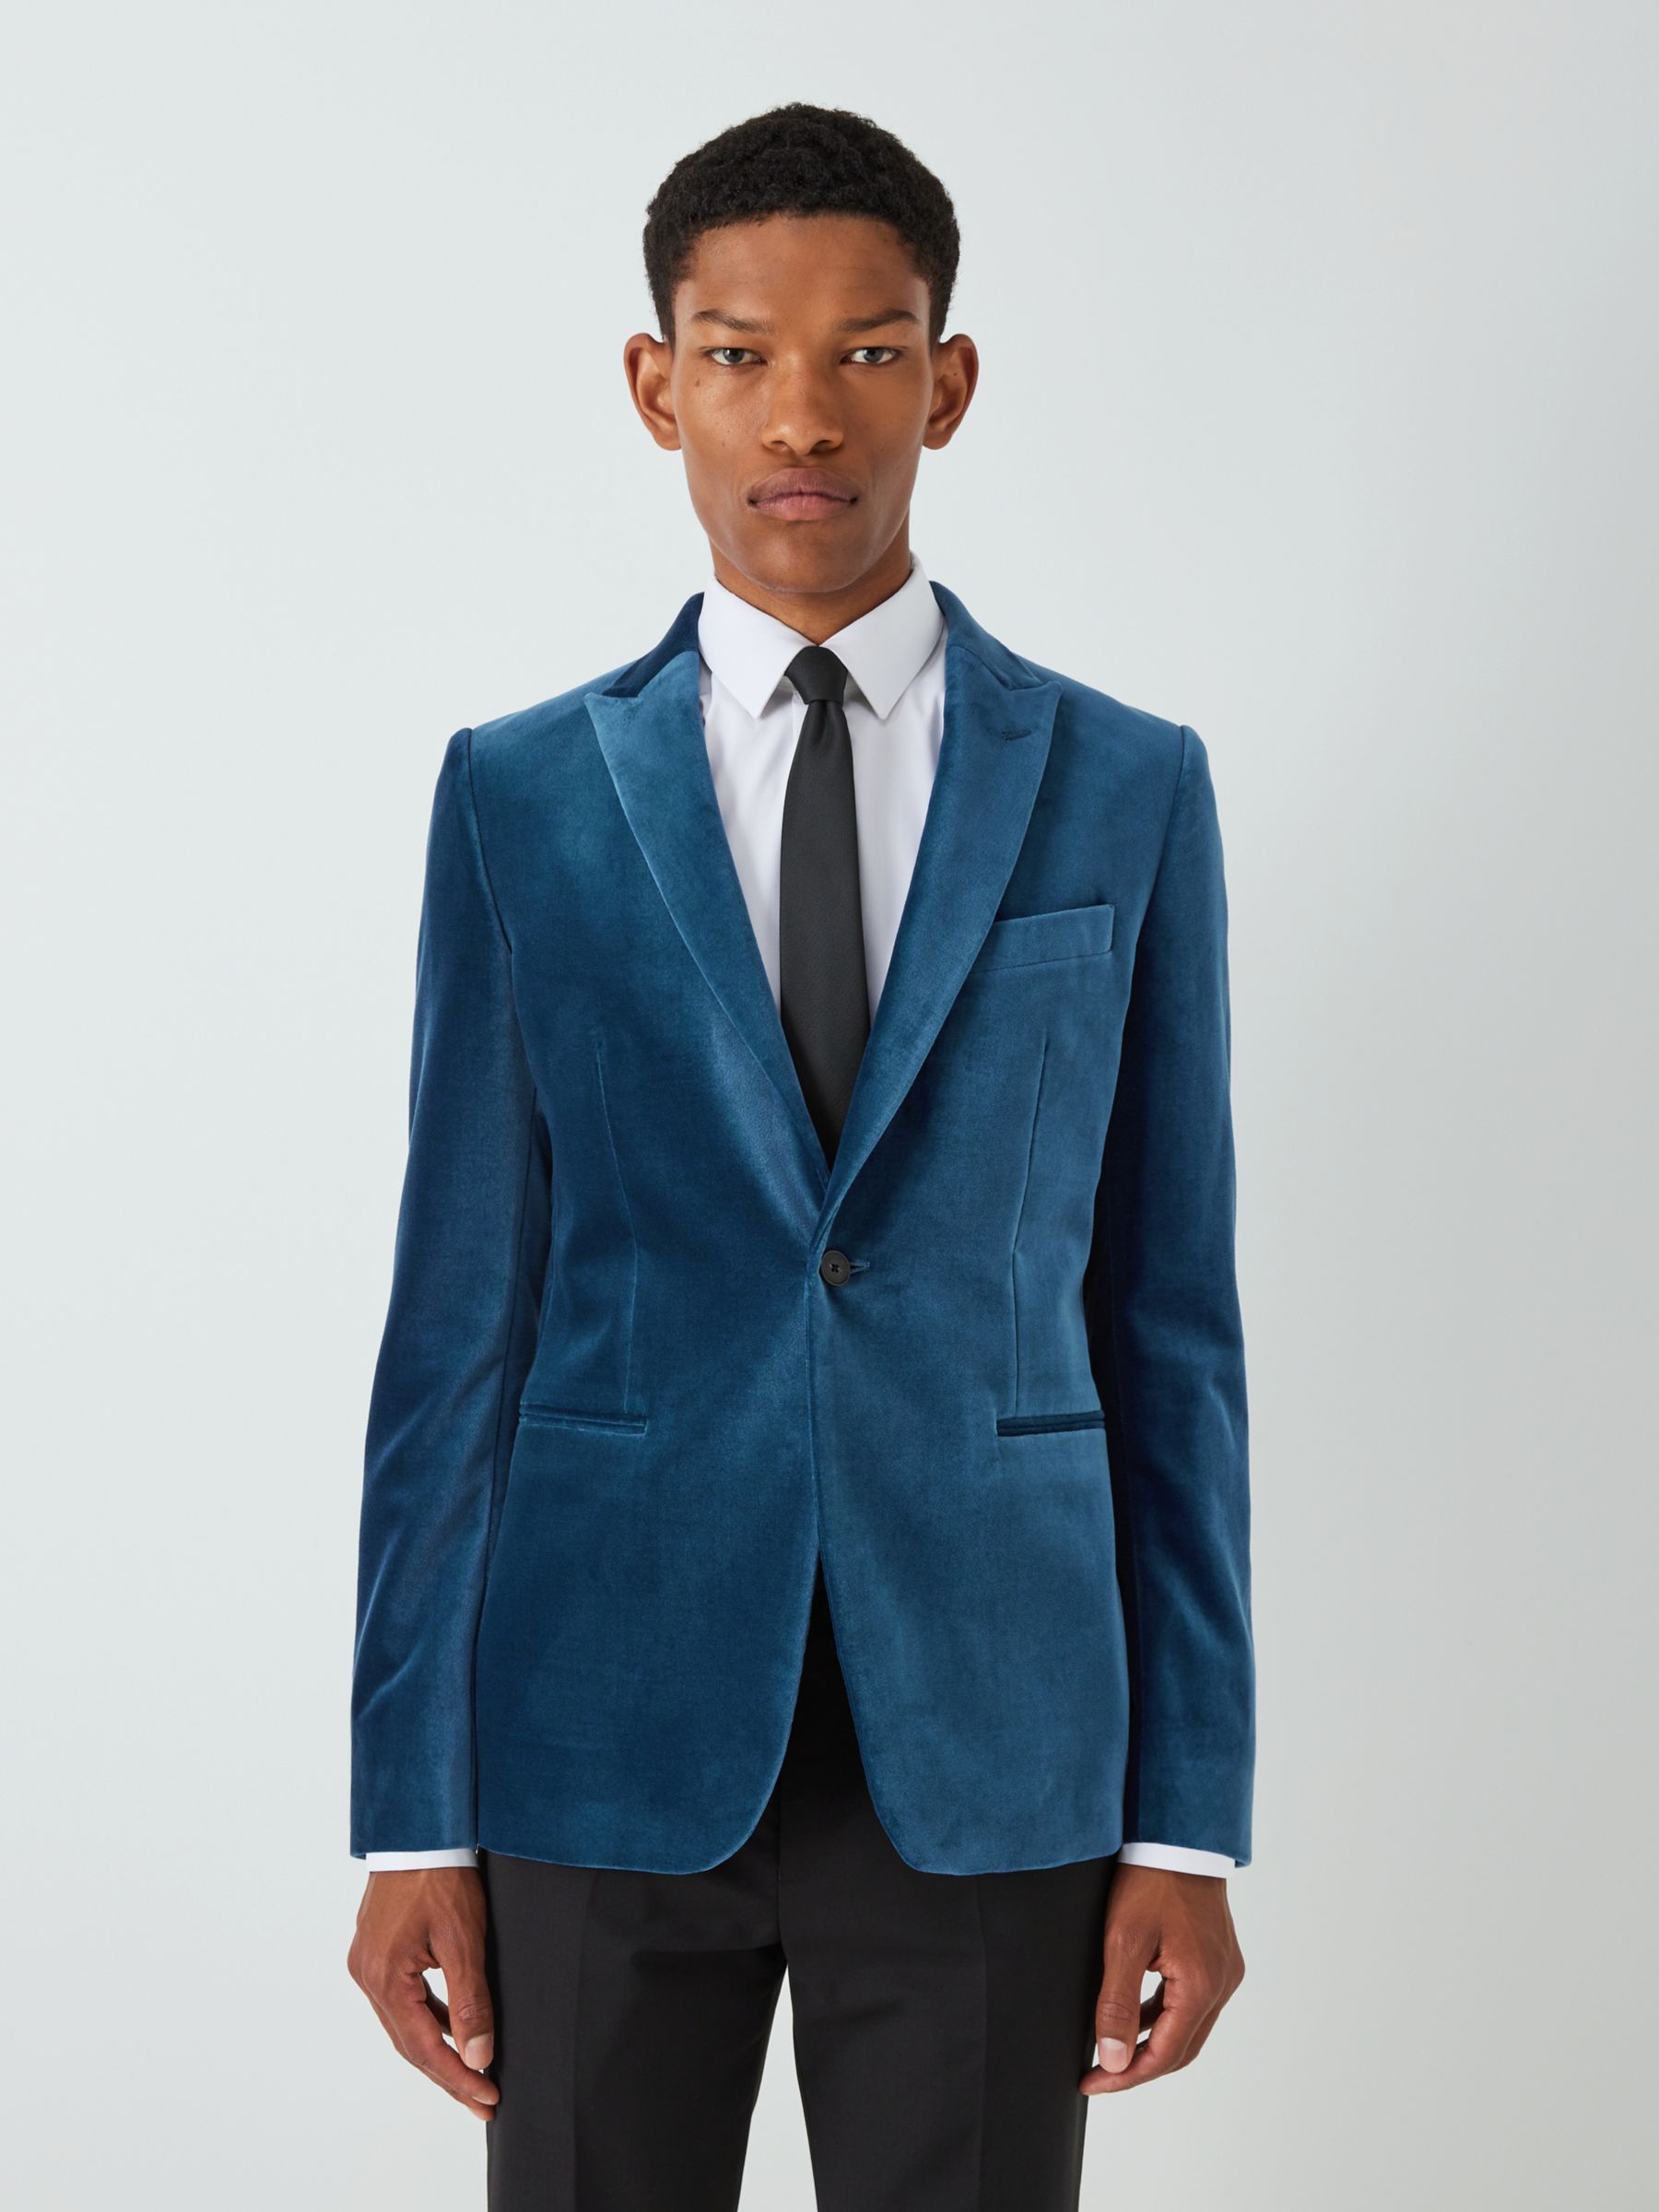 The Velvet Suit - Style Guide – Twisted Tailor